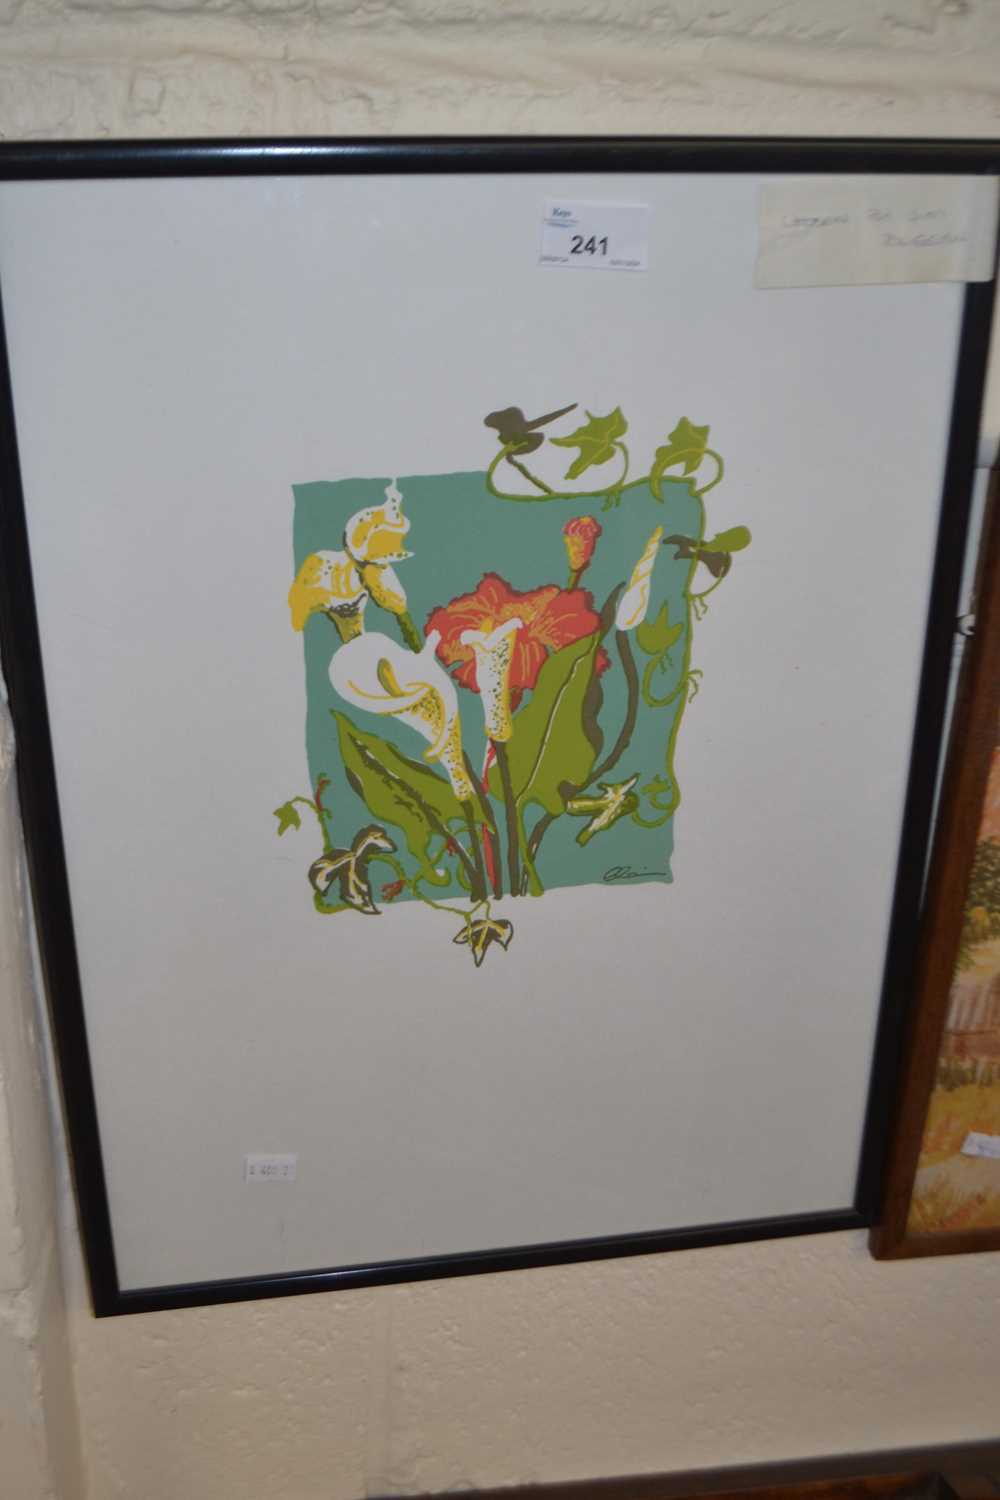 A print of flowers